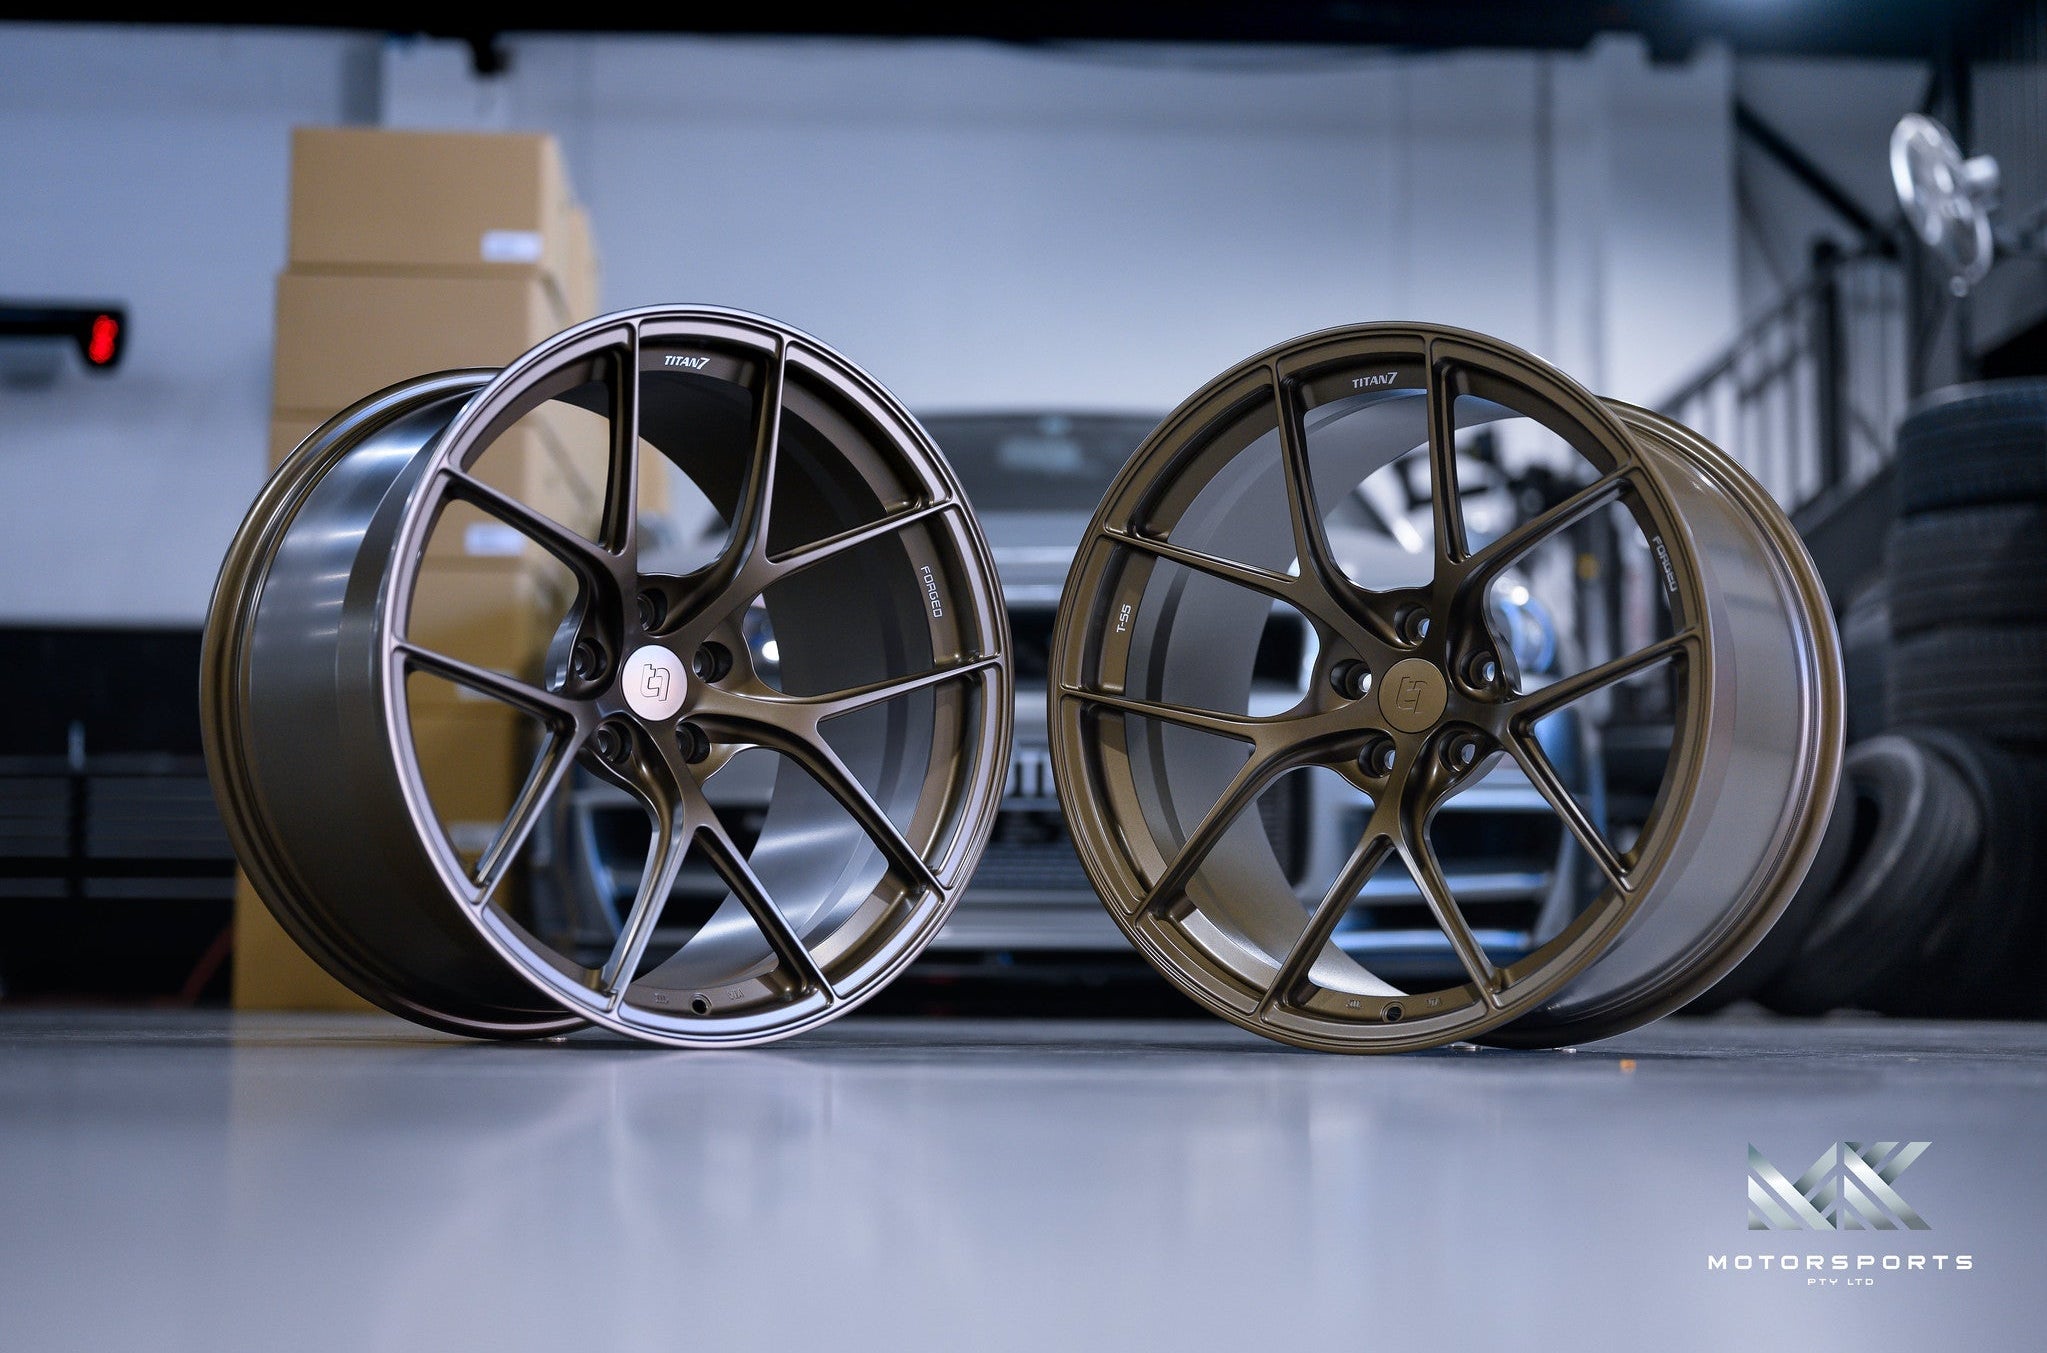 Titan 7 T-S5 for G80/G82 - Premium Wheels from Titan 7 - From just $5990.00! Shop now at MK MOTORSPORTS